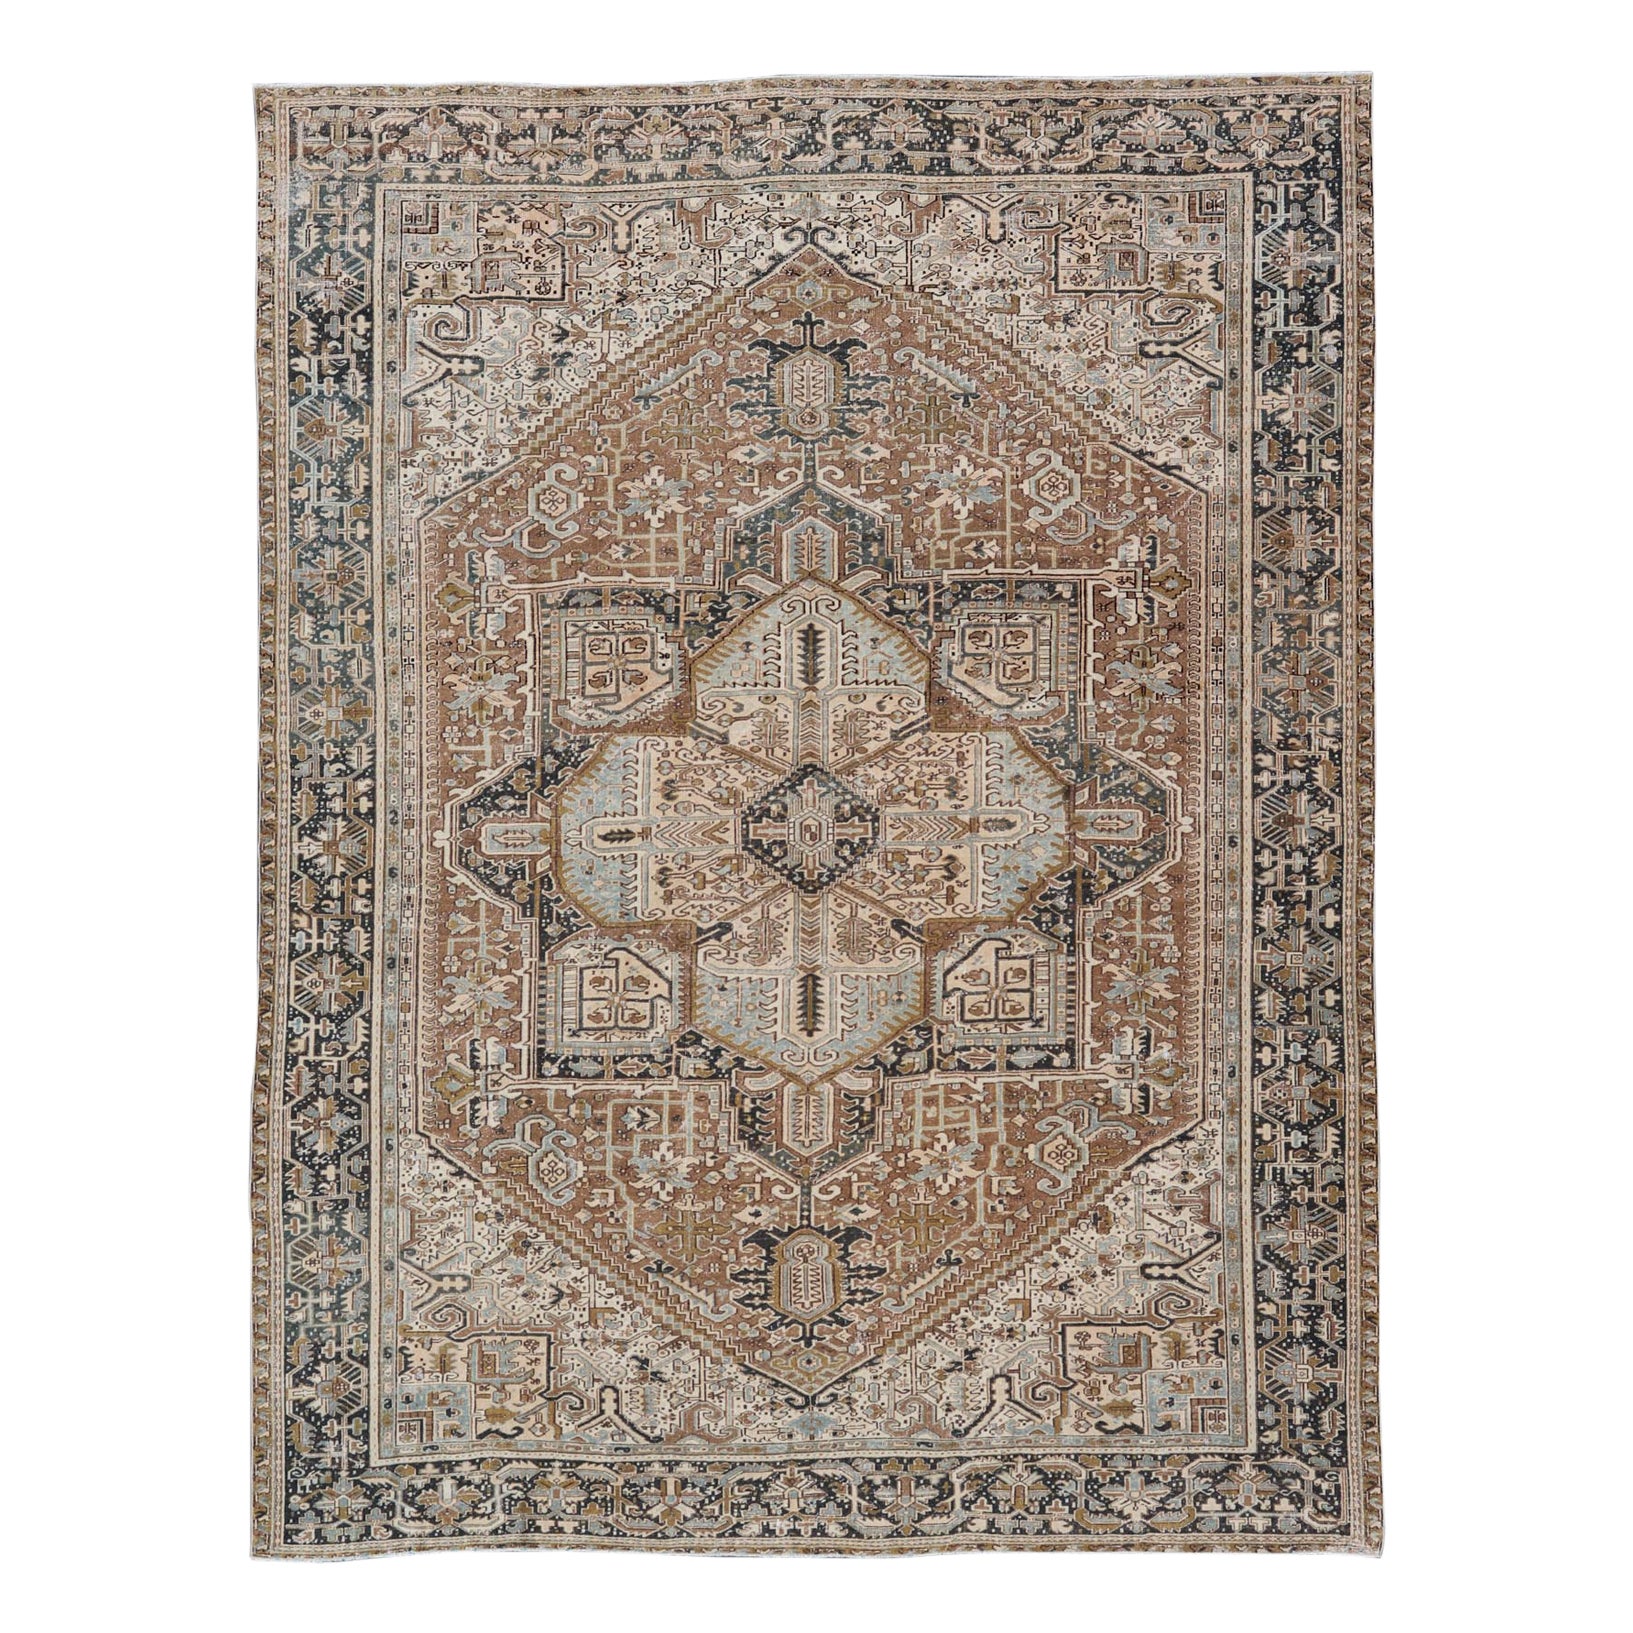 Persian Antique Heriz Rug with Geometric Design in Blue's, Tan, Cream, and Brown